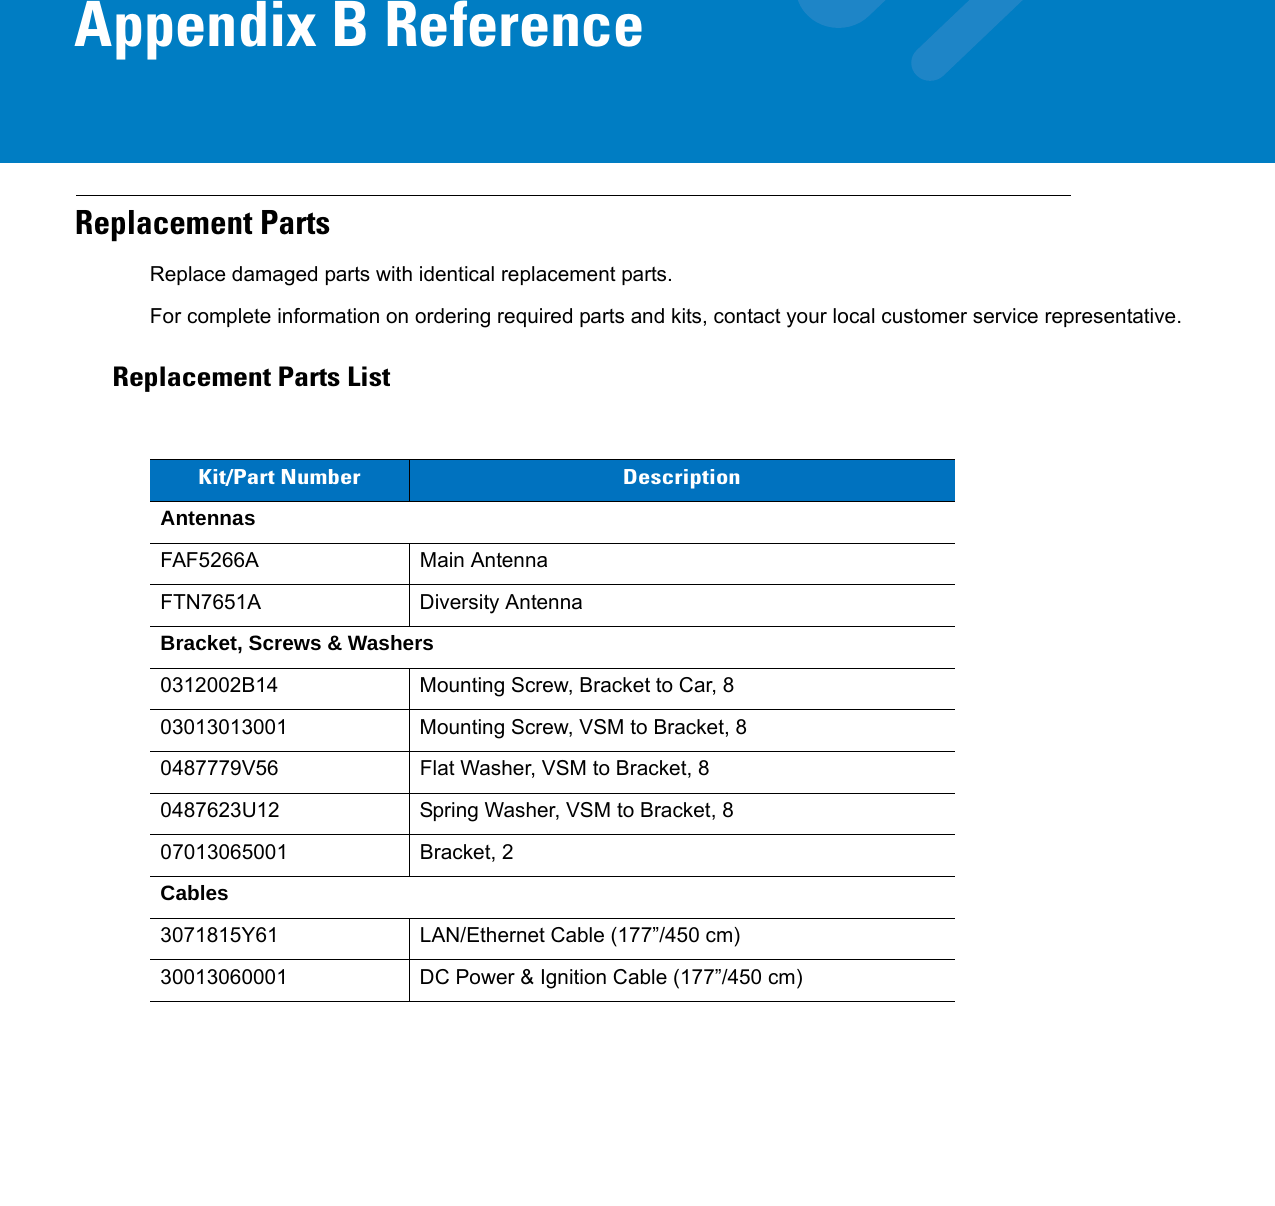 Appendix B ReferenceReplacement PartsReplace damaged parts with identical replacement parts.For complete information on ordering required parts and kits, contact your local customer service representative.Replacement Parts ListKit/Part Number DescriptionAntennasFAF5266A Main AntennaFTN7651A Diversity AntennaBracket, Screws &amp; Washers0312002B14 Mounting Screw, Bracket to Car, 803013013001 Mounting Screw, VSM to Bracket, 80487779V56 Flat Washer, VSM to Bracket, 80487623U12 Spring Washer, VSM to Bracket, 807013065001 Bracket, 2Cables3071815Y61 LAN/Ethernet Cable (177”/450 cm)30013060001 DC Power &amp; Ignition Cable (177”/450 cm)